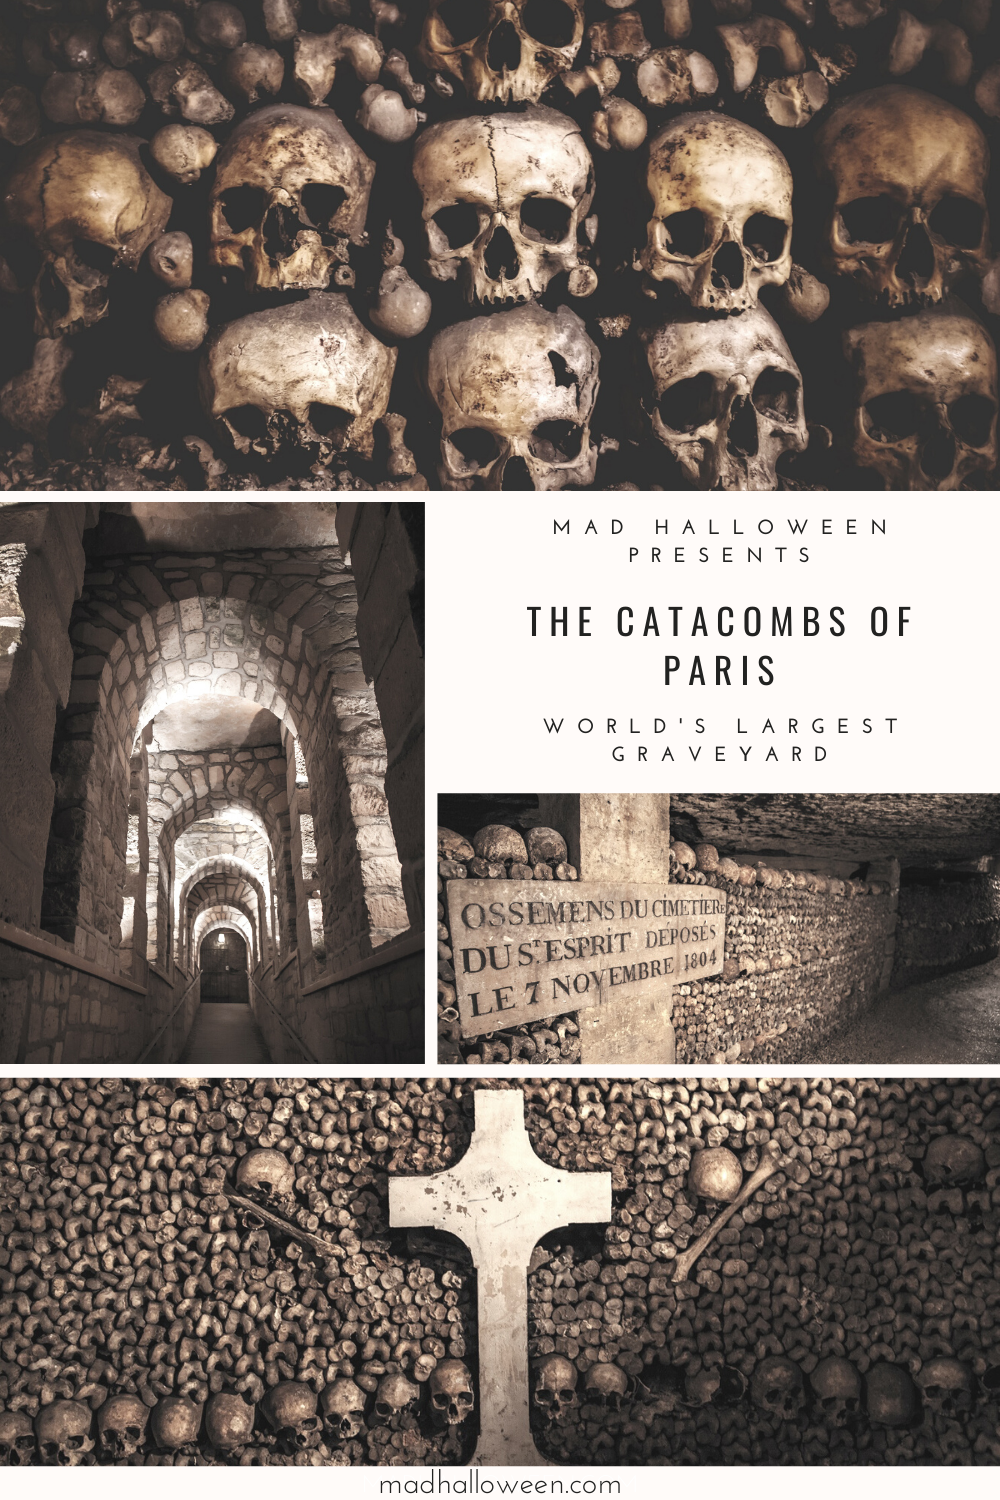 The Catacombs of Paris - Mad Halloween - Paris has a worldwide reputation for being the City of Love. Most of the people who visit there do so for that reason. They want to see history come to life with Notre Dame Cathedral, the Eiffel Tower, and countless other places that have been the source of inspiration for poets throughout the ages. However, what a lot of people don’t know is that underneath the City of Love lies a literal city of the dead. This is known as the Catacombs of Paris. 